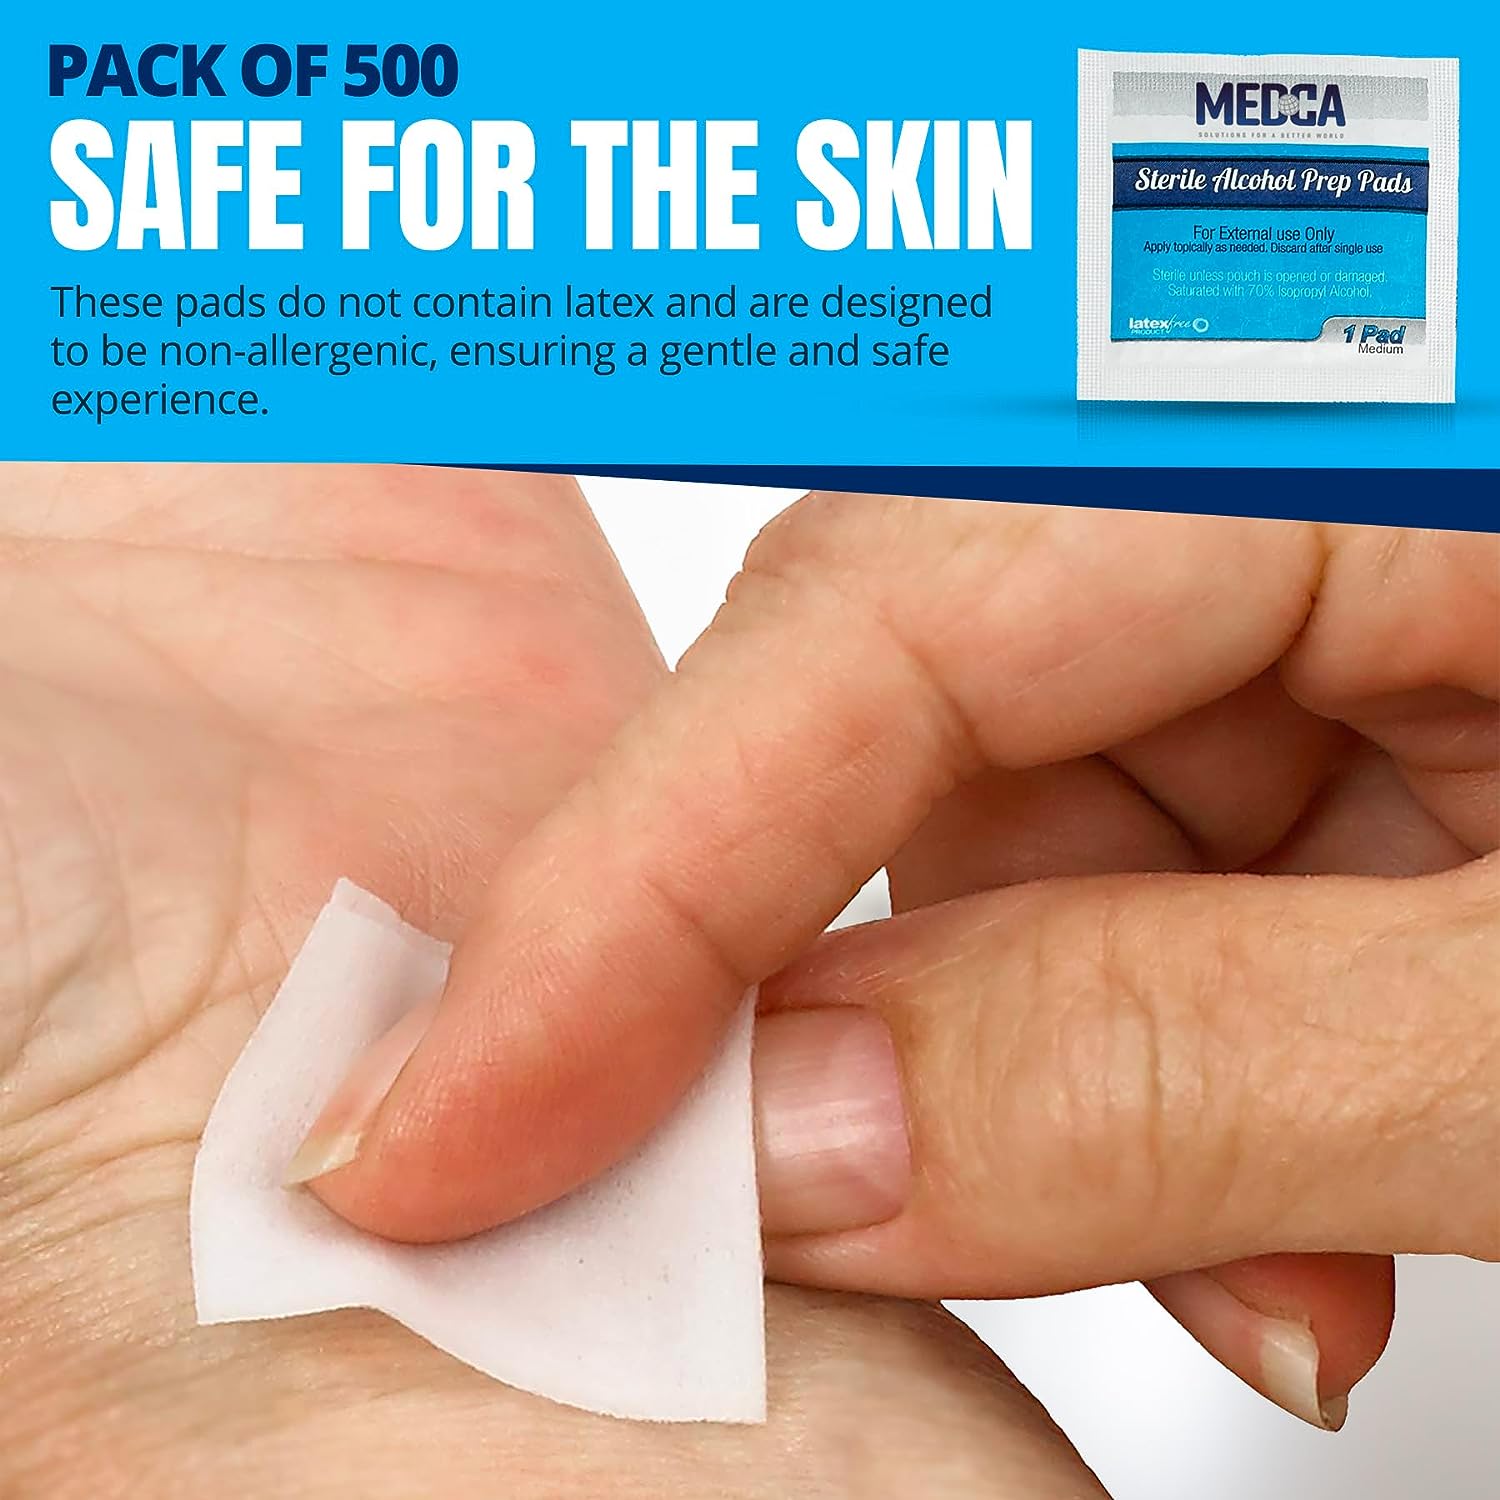 MEDca Wipes Sterile Alcohol Prep Sanitizer Swab Cotton Pads 500 Count - image 5 of 8